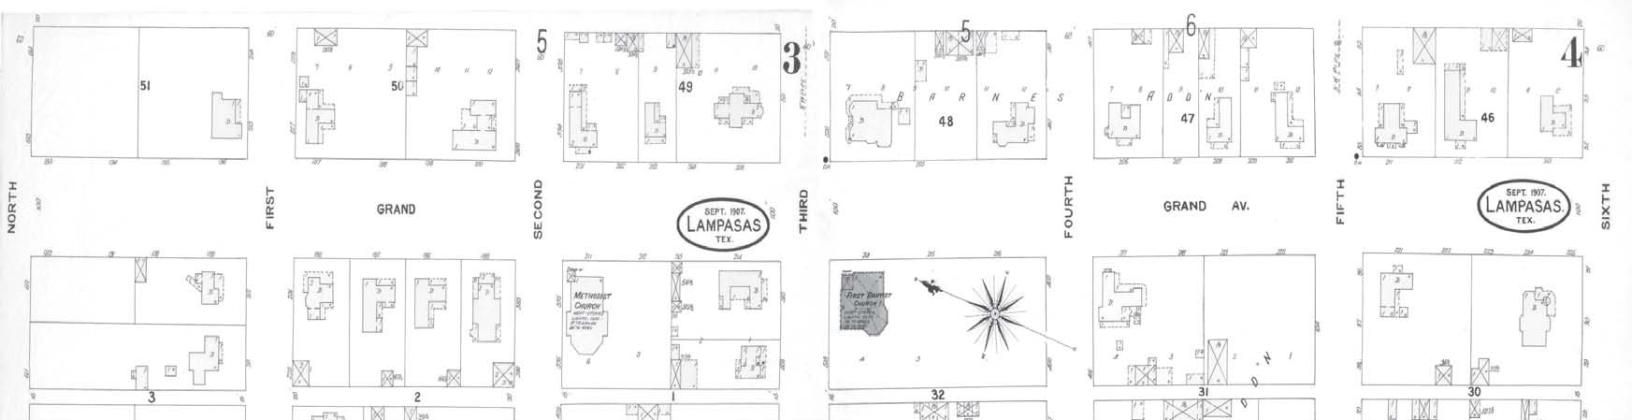 Grand Avenue was destined to become the main artery through town, but as yet it did not link up with any of the new highway routes coming into Lampasas. Section from 1907 Sanborn Map of Lampasas | Portal to Texas History, University of North Texas